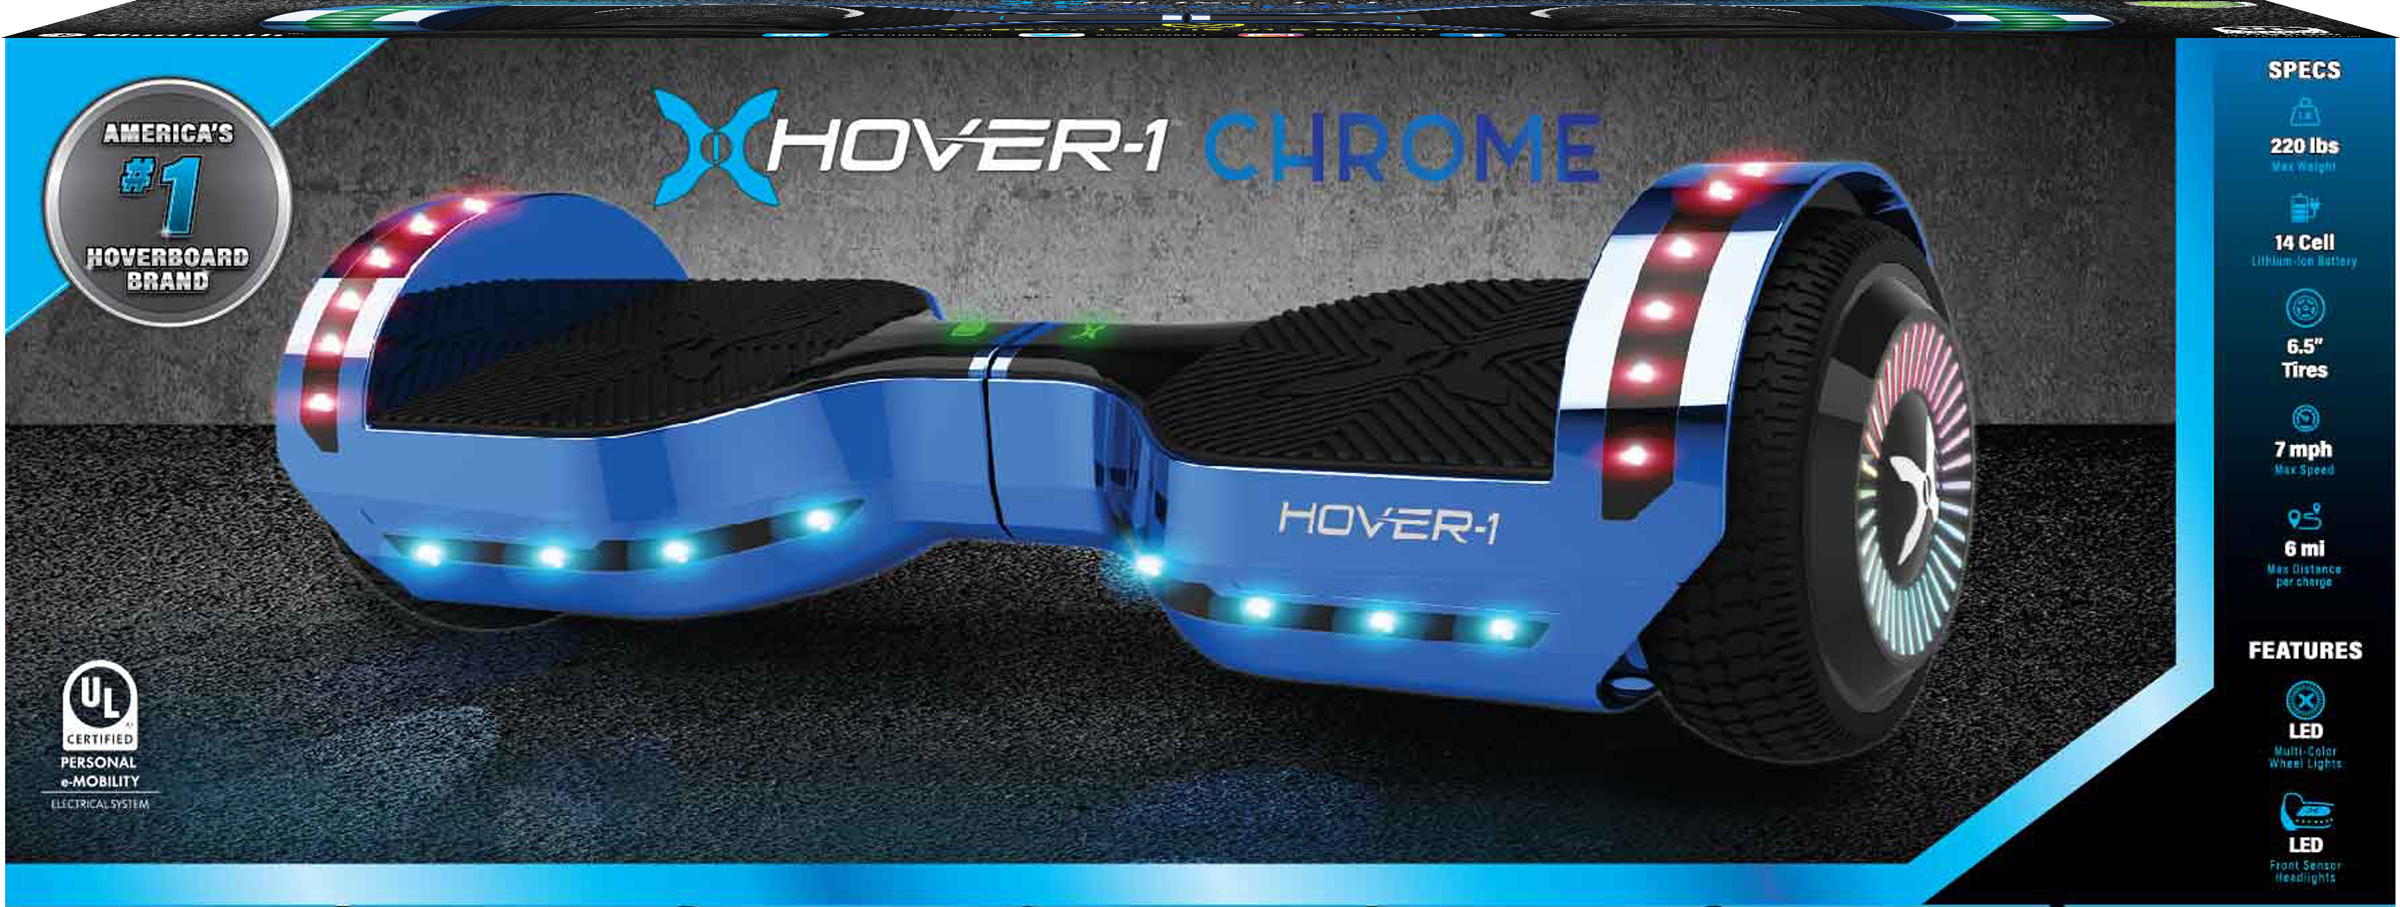 Hover-1 Chrome Hoverboard, LED Lights, Bluetooth Speaker, 6.5 In. Tires, 220 Lbs. Max weight, 7 mph - image 5 of 8